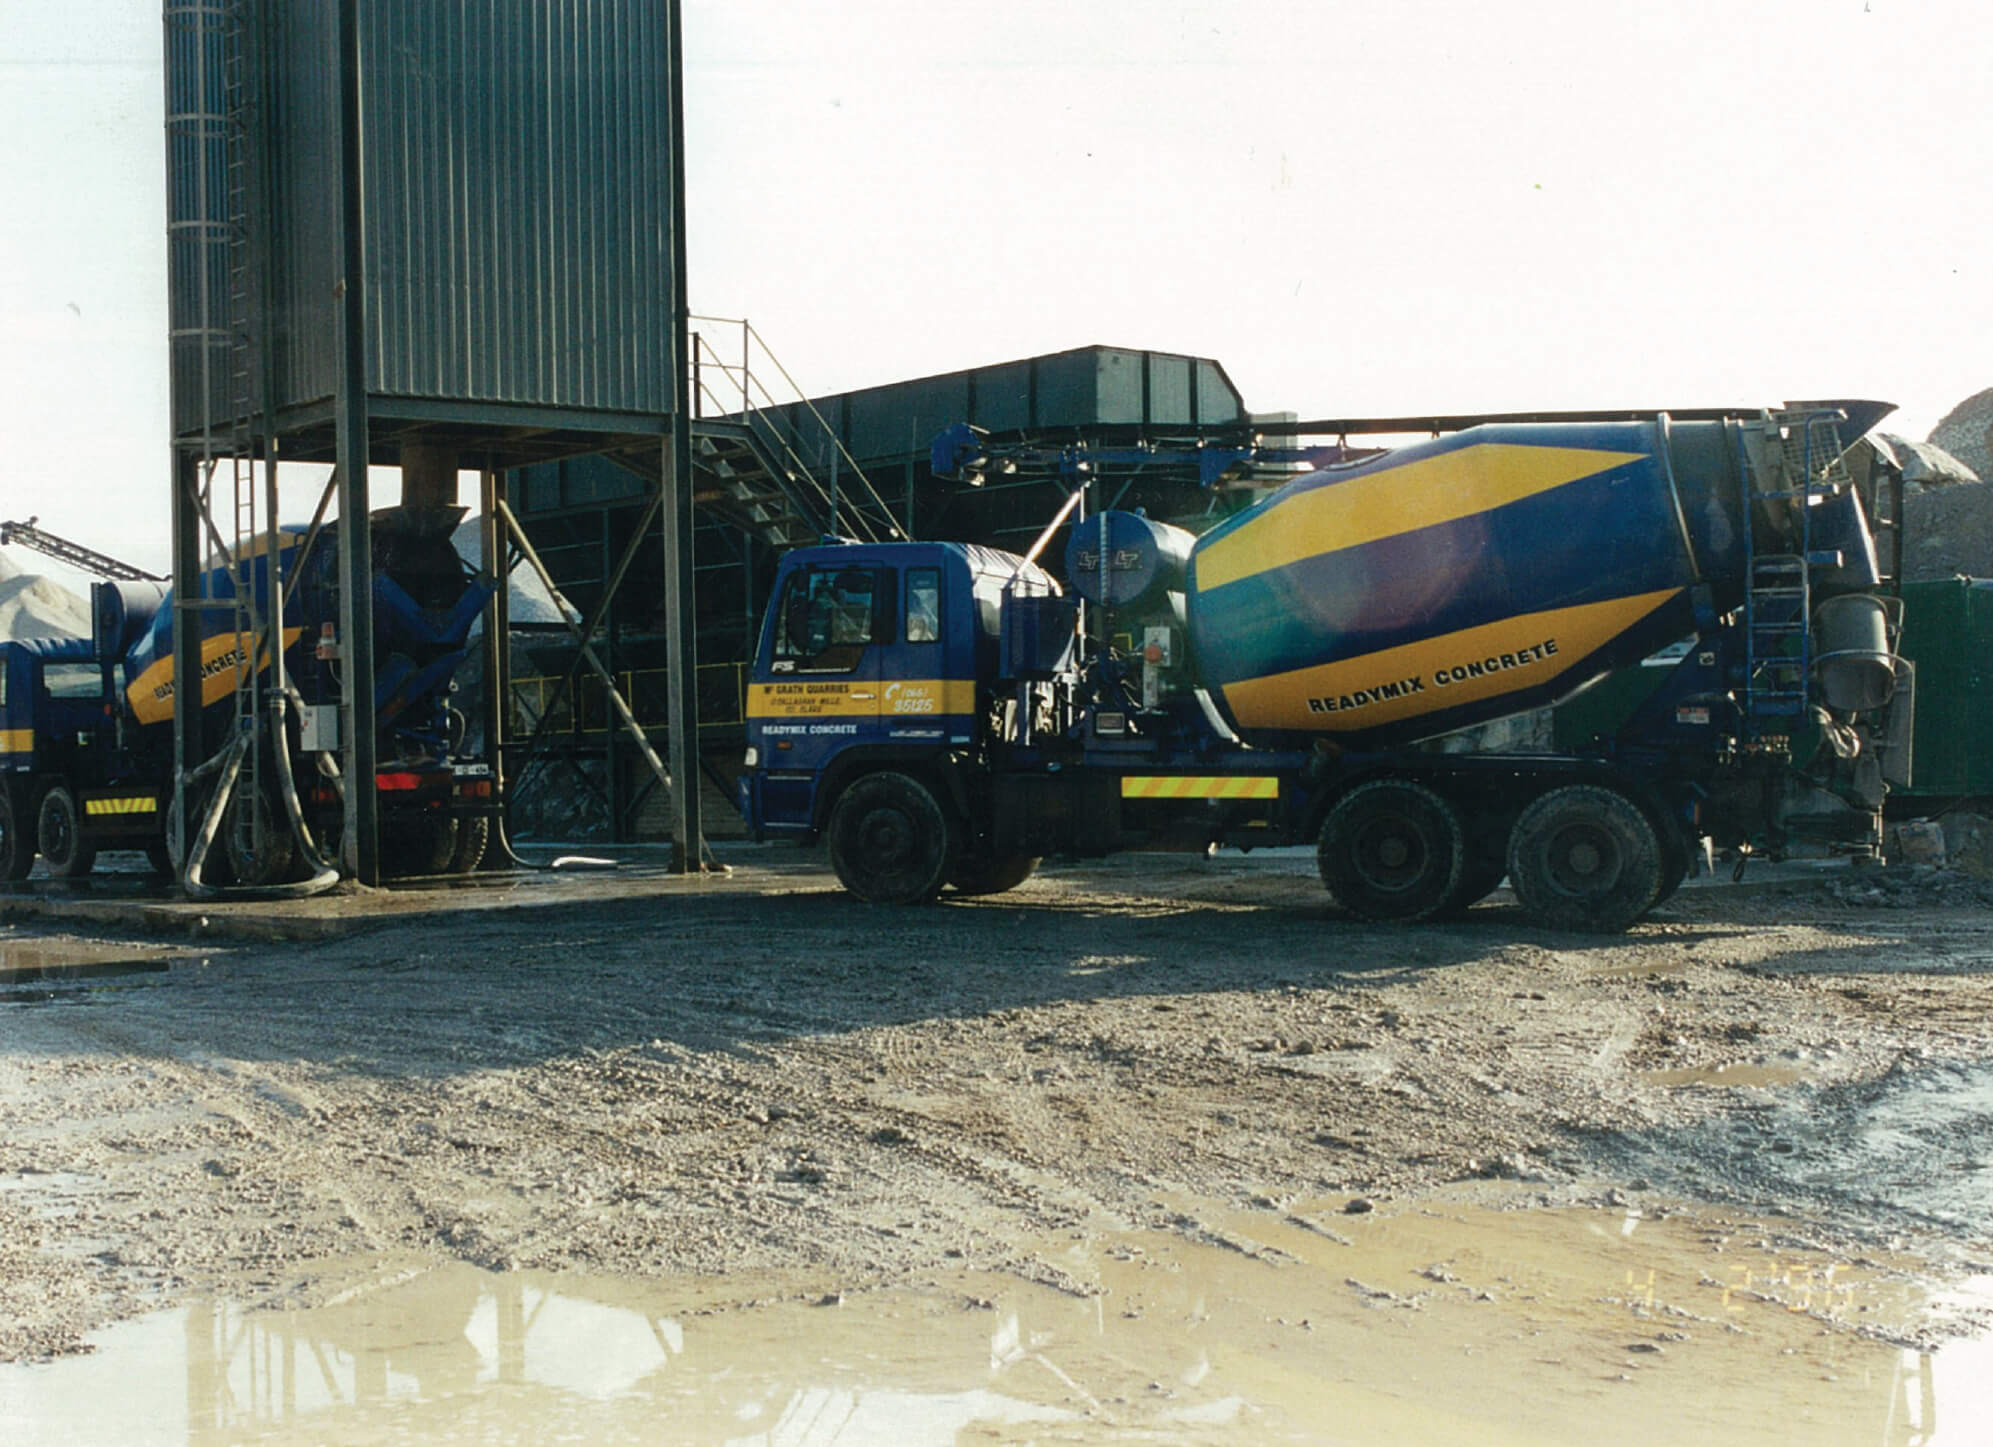 Readymix concrete produced in 1995